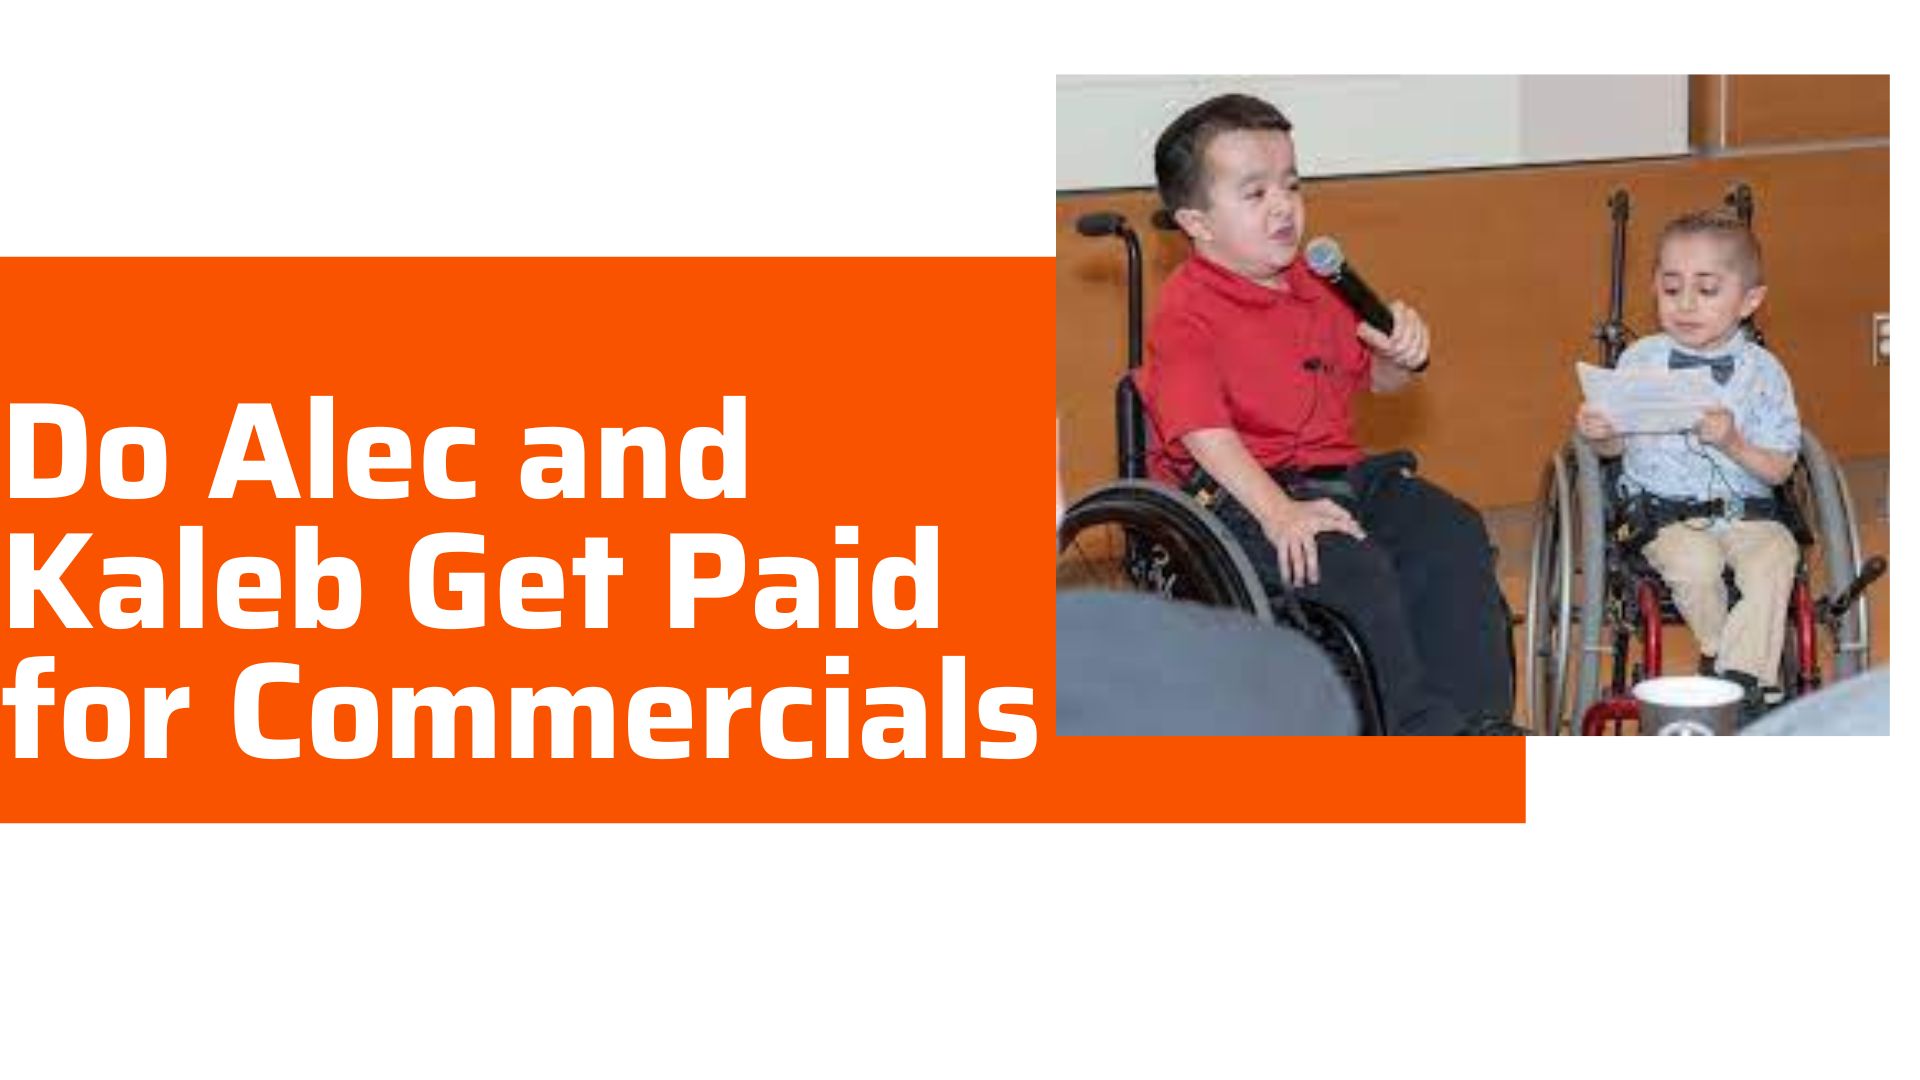 Do Alec and Kaleb get paid for commercials?